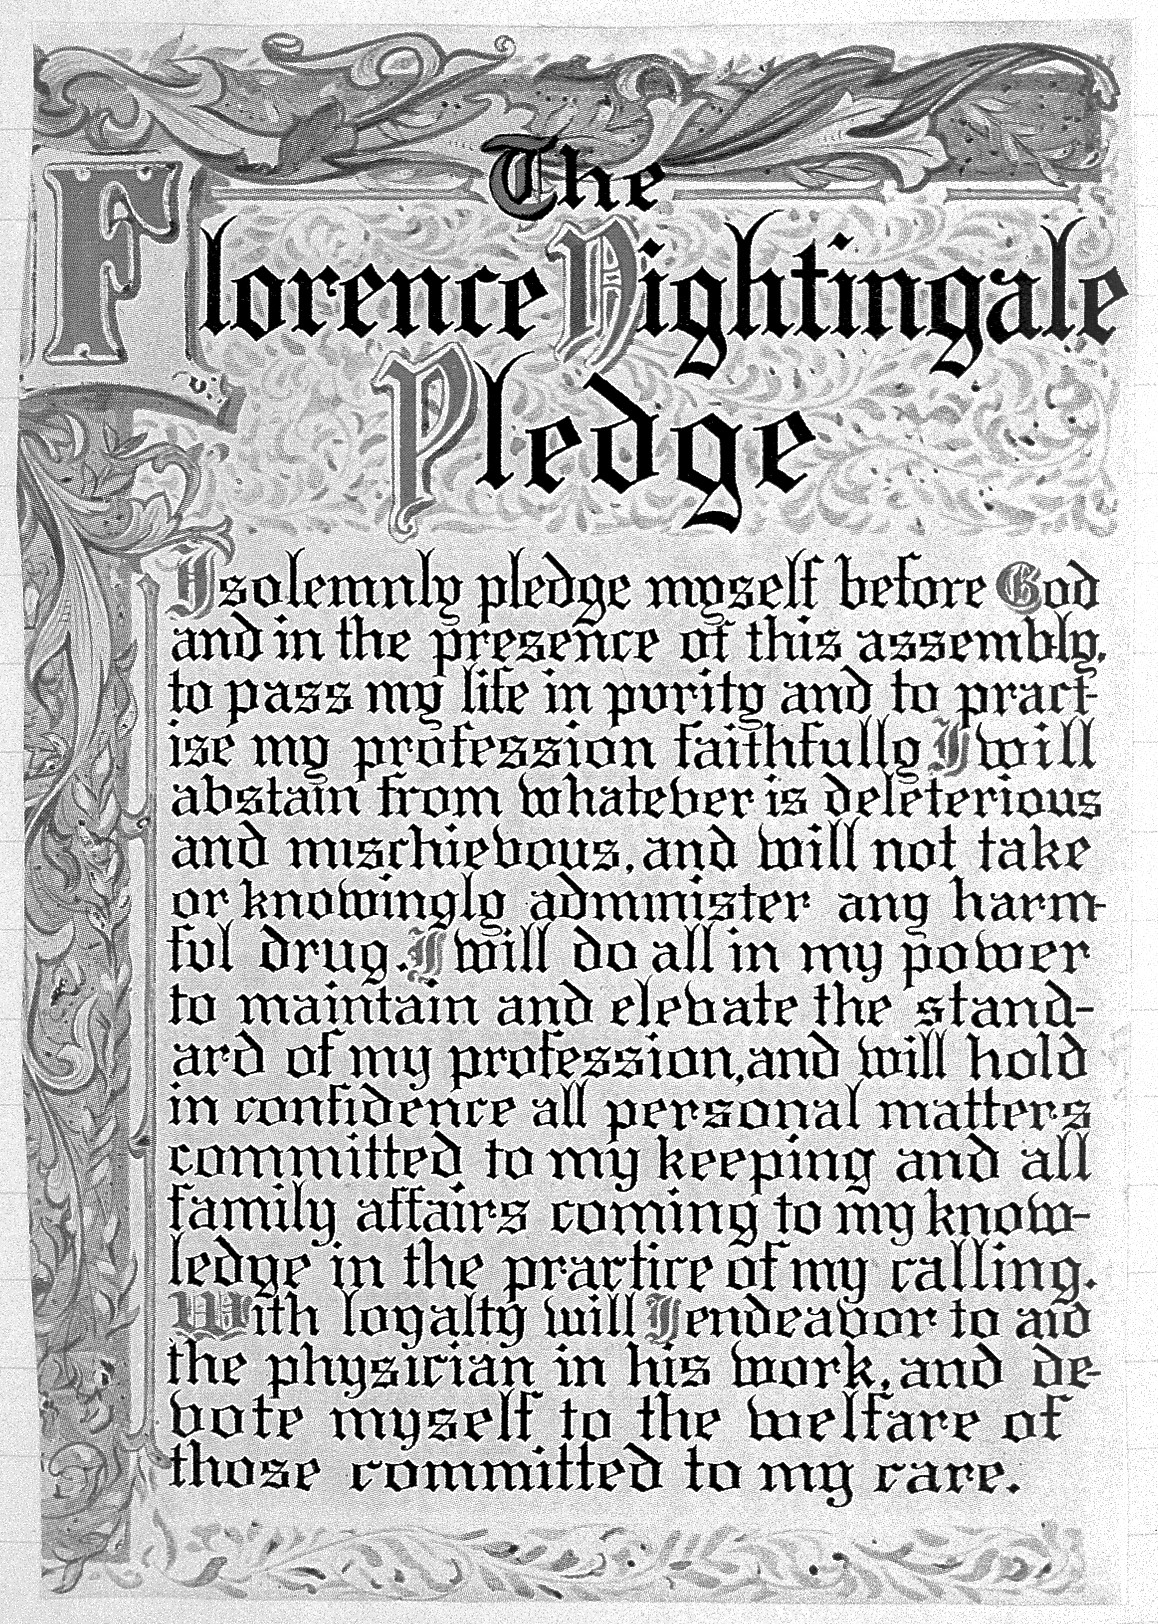 Pledge of Florence Nightingale. Credit: Wellcome Library, London.